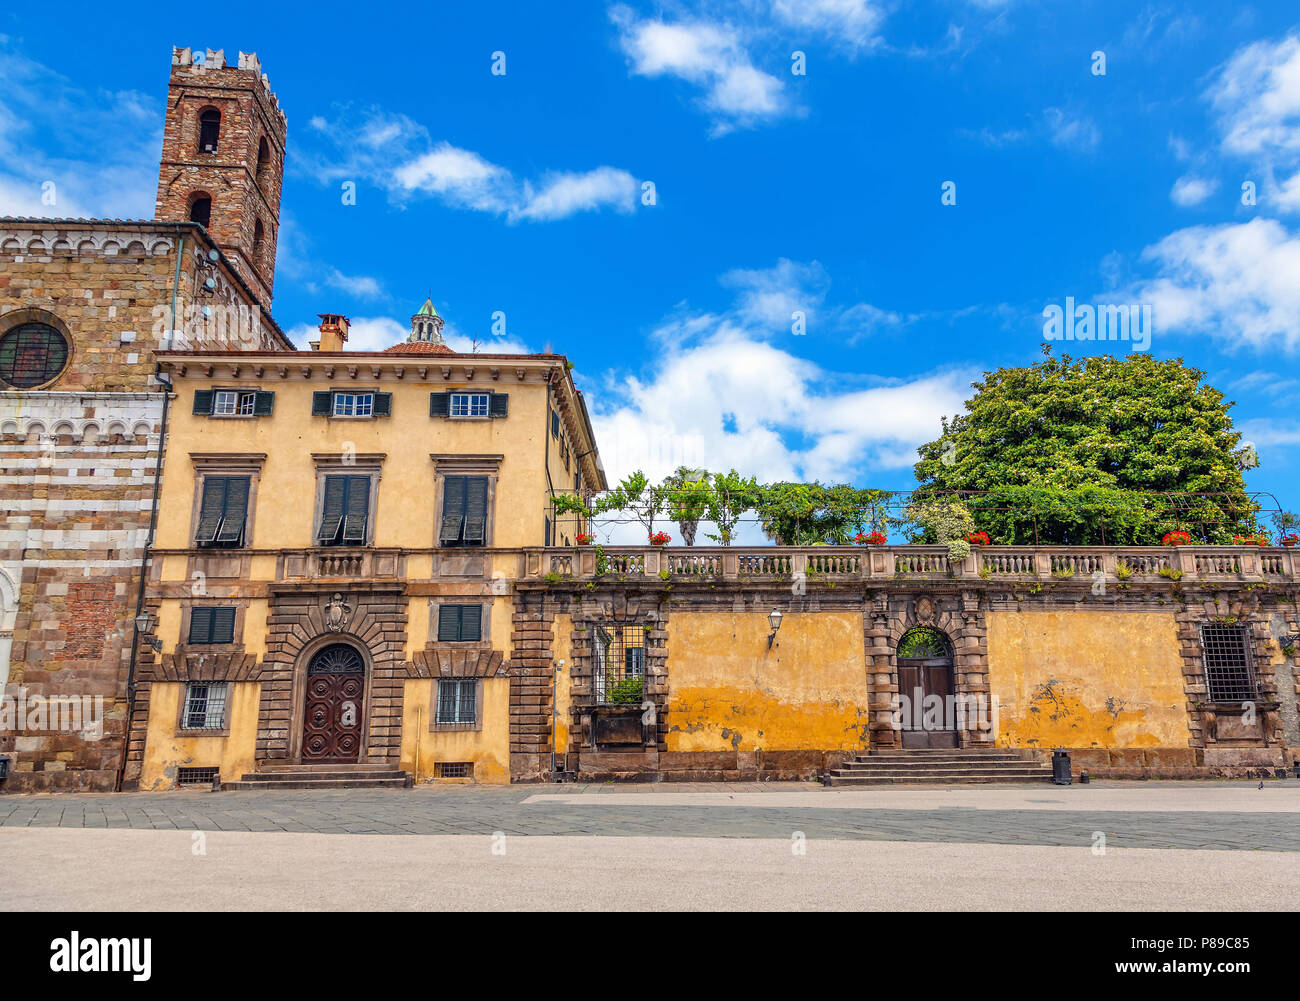 The square of St. Martino in the ancient italian town of Lucca. Stock Photo